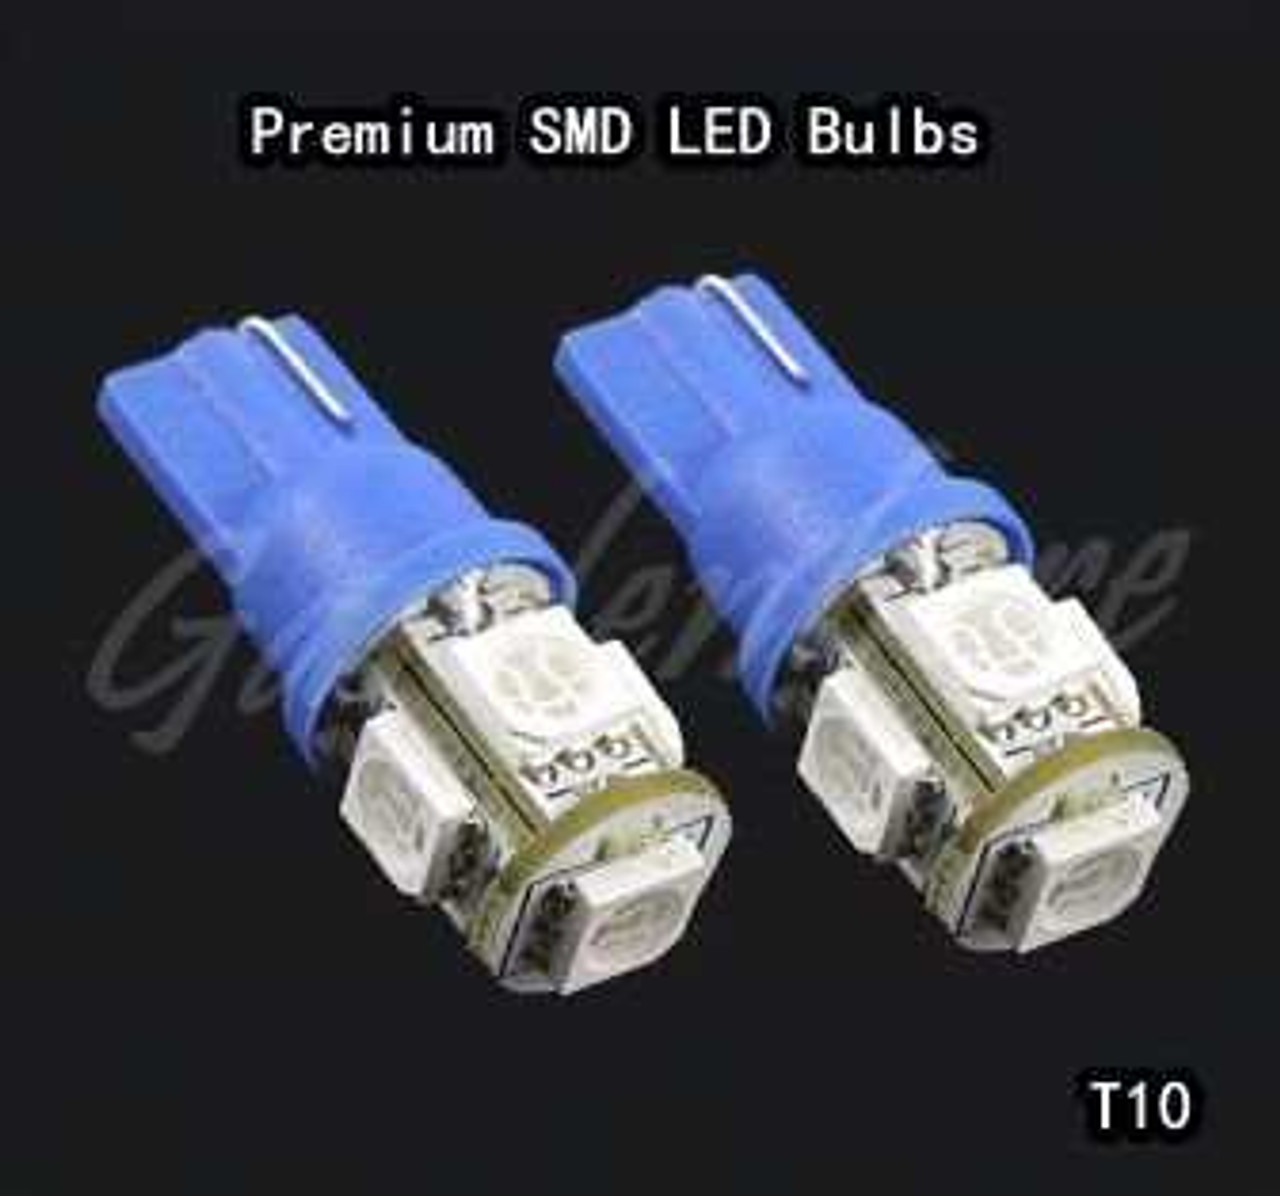 2 x BL300w Blue LED Replacement Parking Accent T10 194 168 2821 2825 W5W Map Dome Light Bulbs